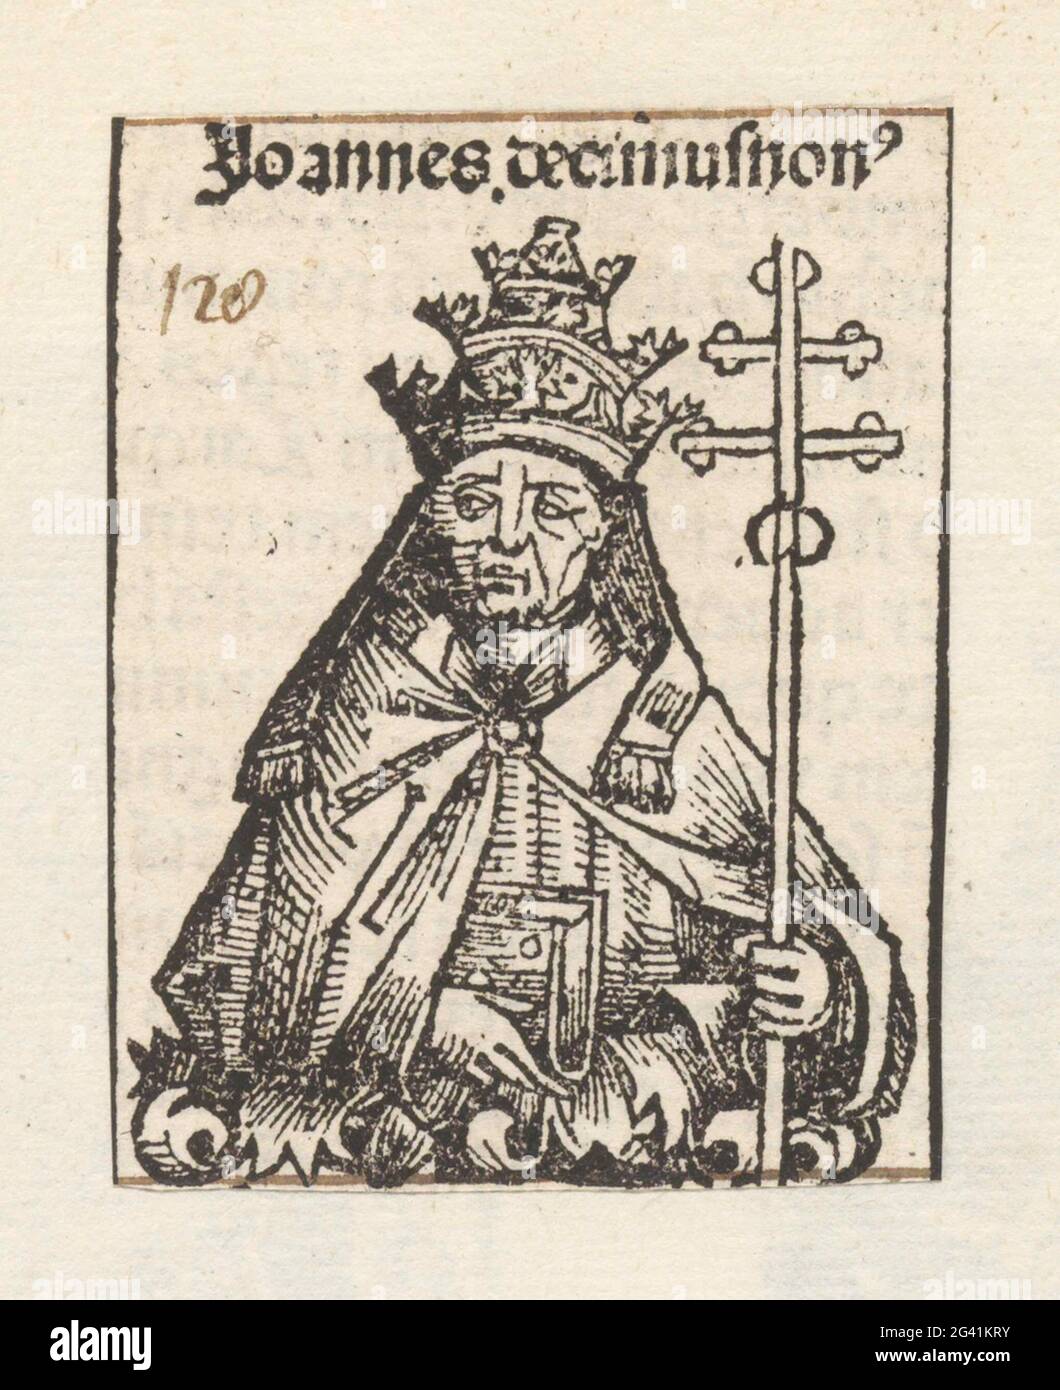 Pope John XVIII or XIX; Joannes Decimussnon [US]; Liber chronicarum. A flower celk with a pope. He is wearing a Tiara and has a Bible and a staff with a double cross in his hands. The show is part of the sequence pops in the Liber Chronicarum. The text identifies the man as Johannes XIX, but according to the series John XVIII is meant. The print is part of an album. Stock Photo